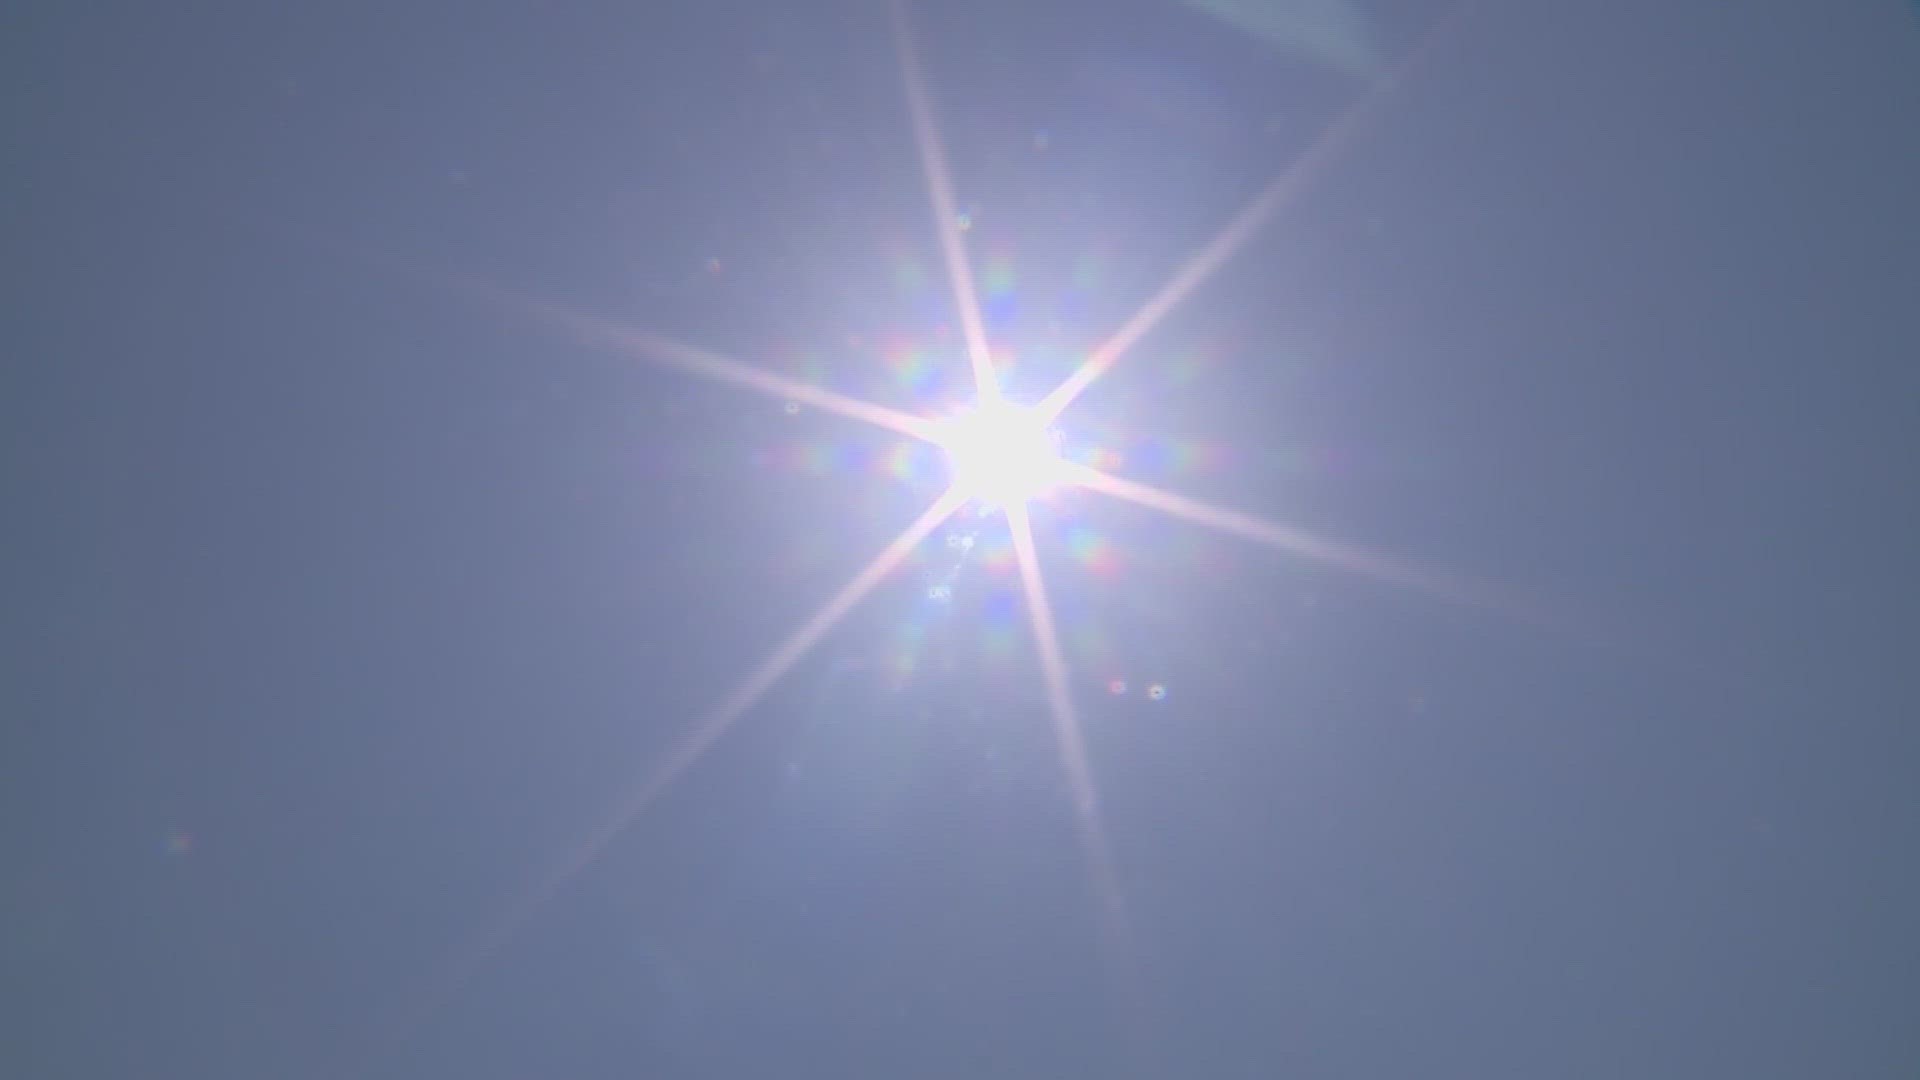 According to the Texas Department of State Health Services, nearly 300 people died from the heat last year. At least one of those deaths was from Bexar County.